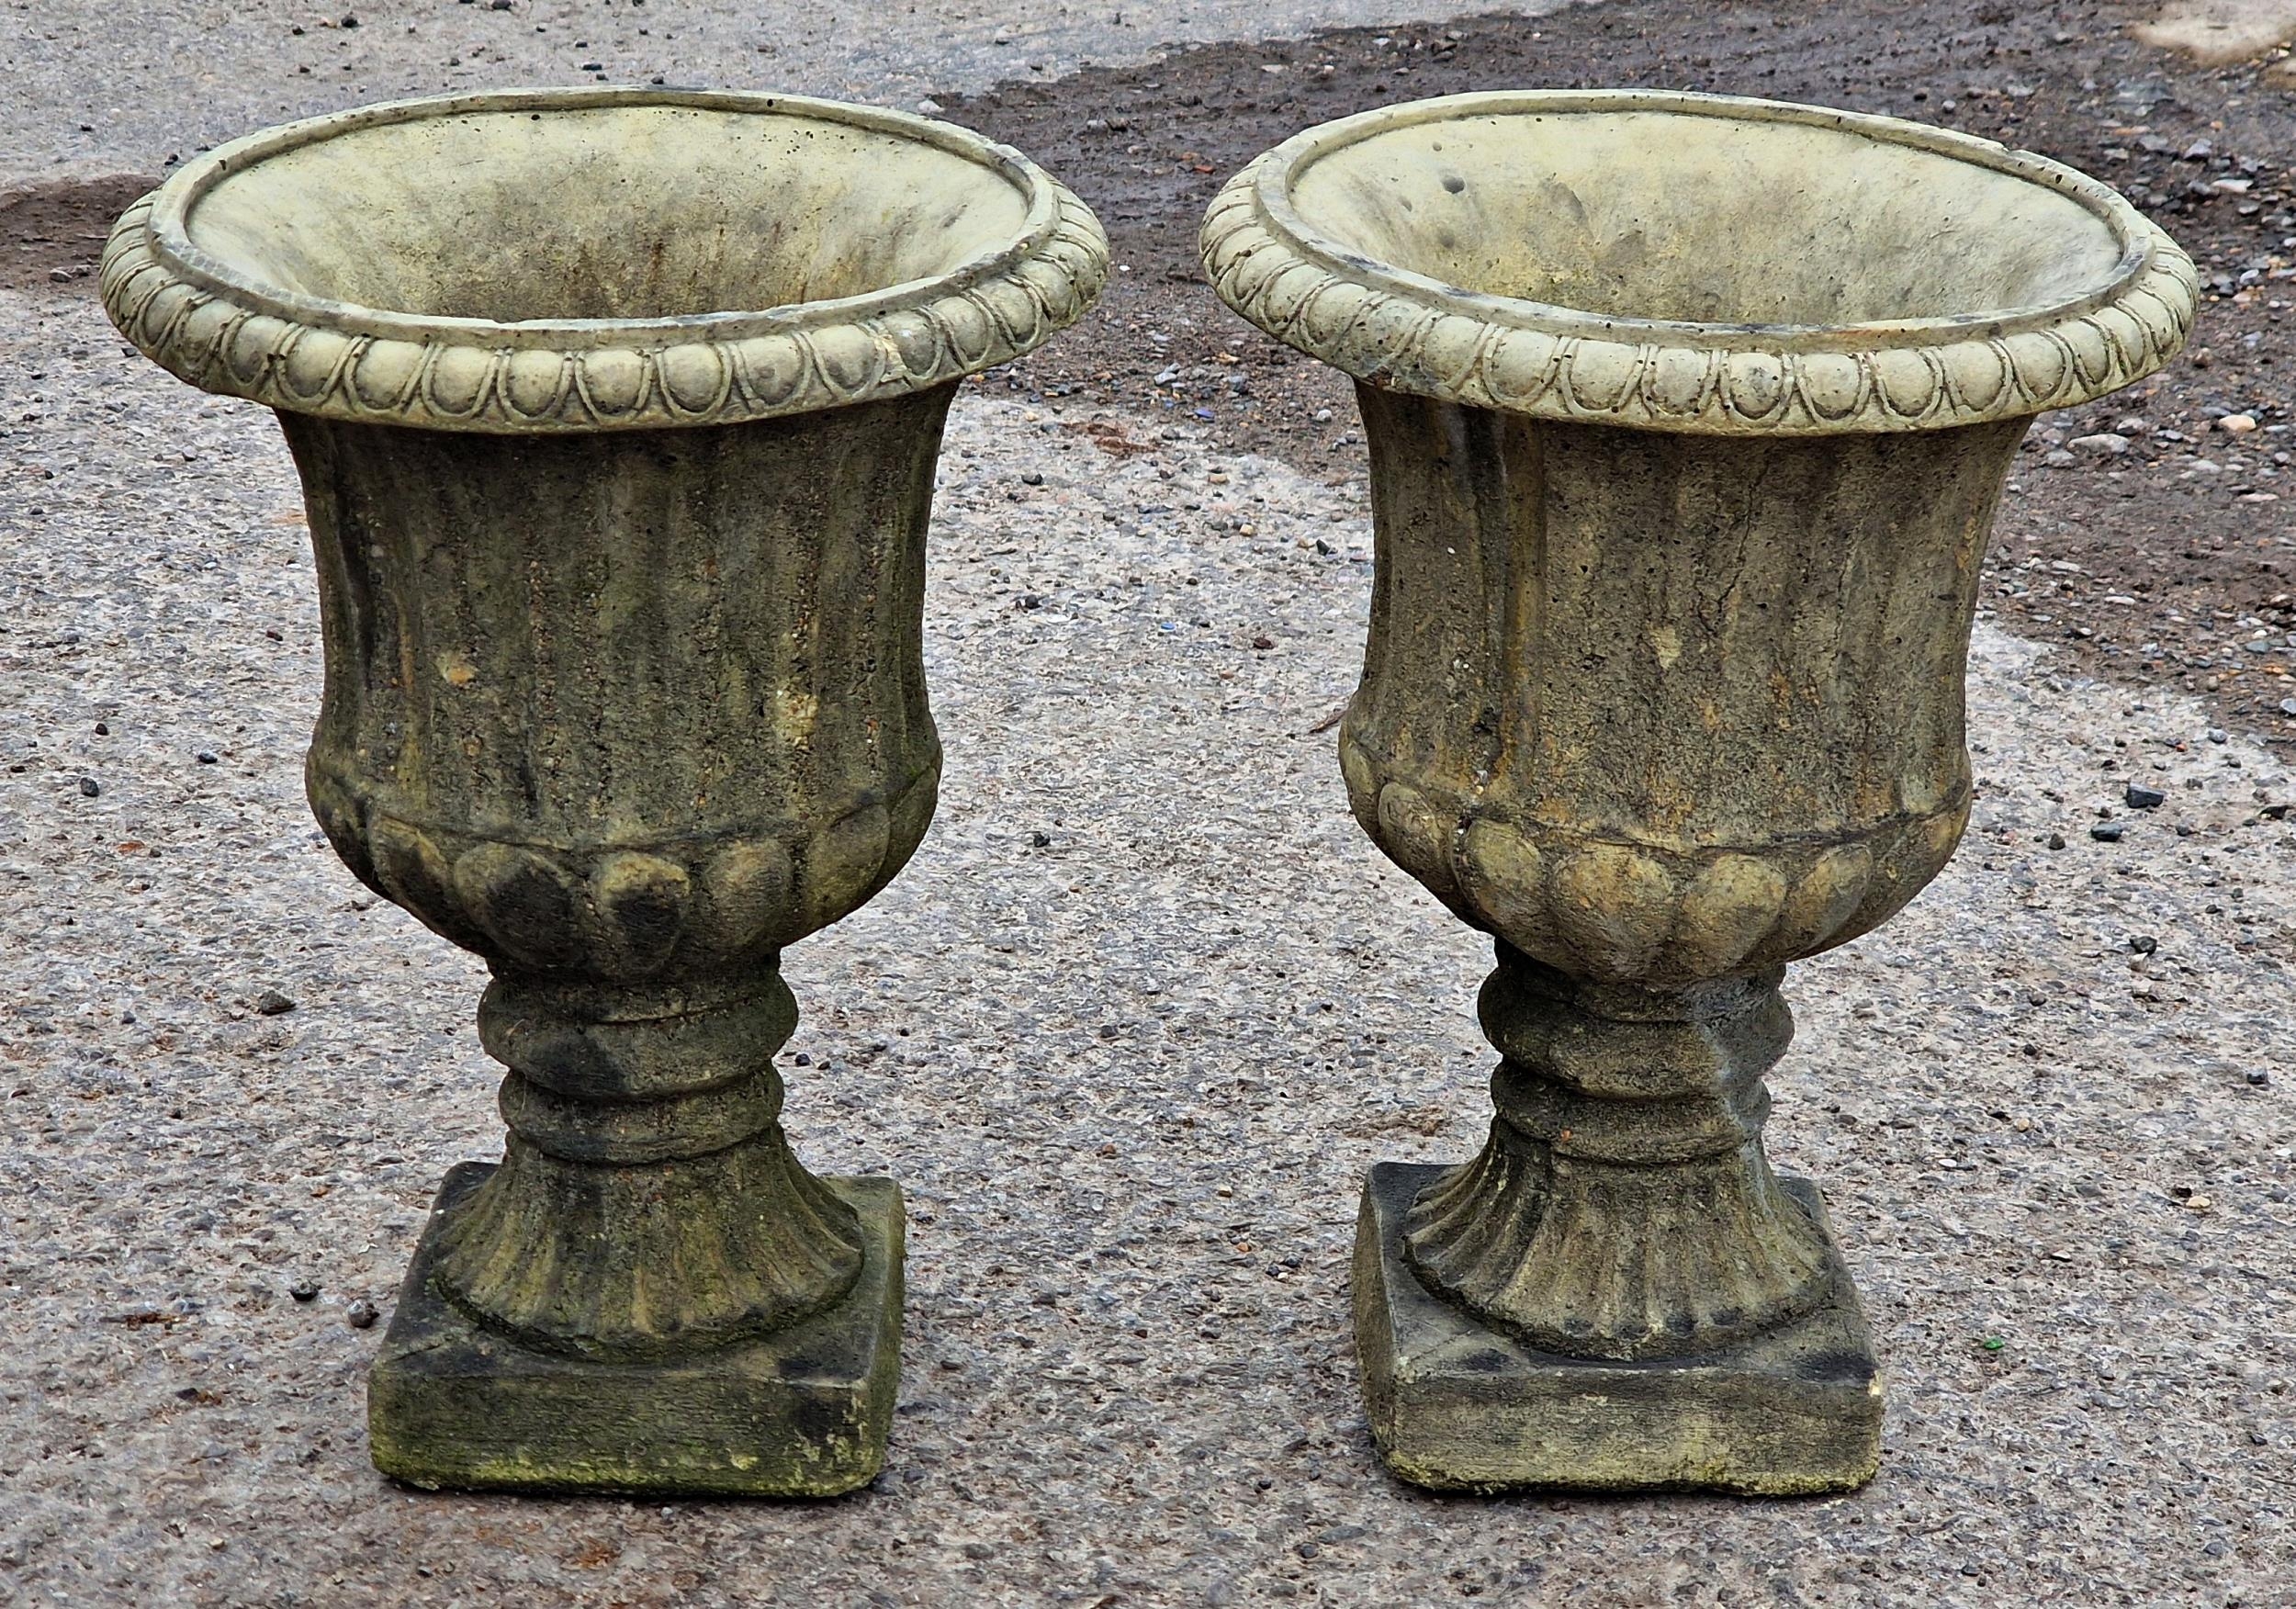 Pair of reconstituted stone Campana shaped garden urns with lobed bowls and flared egg and dart